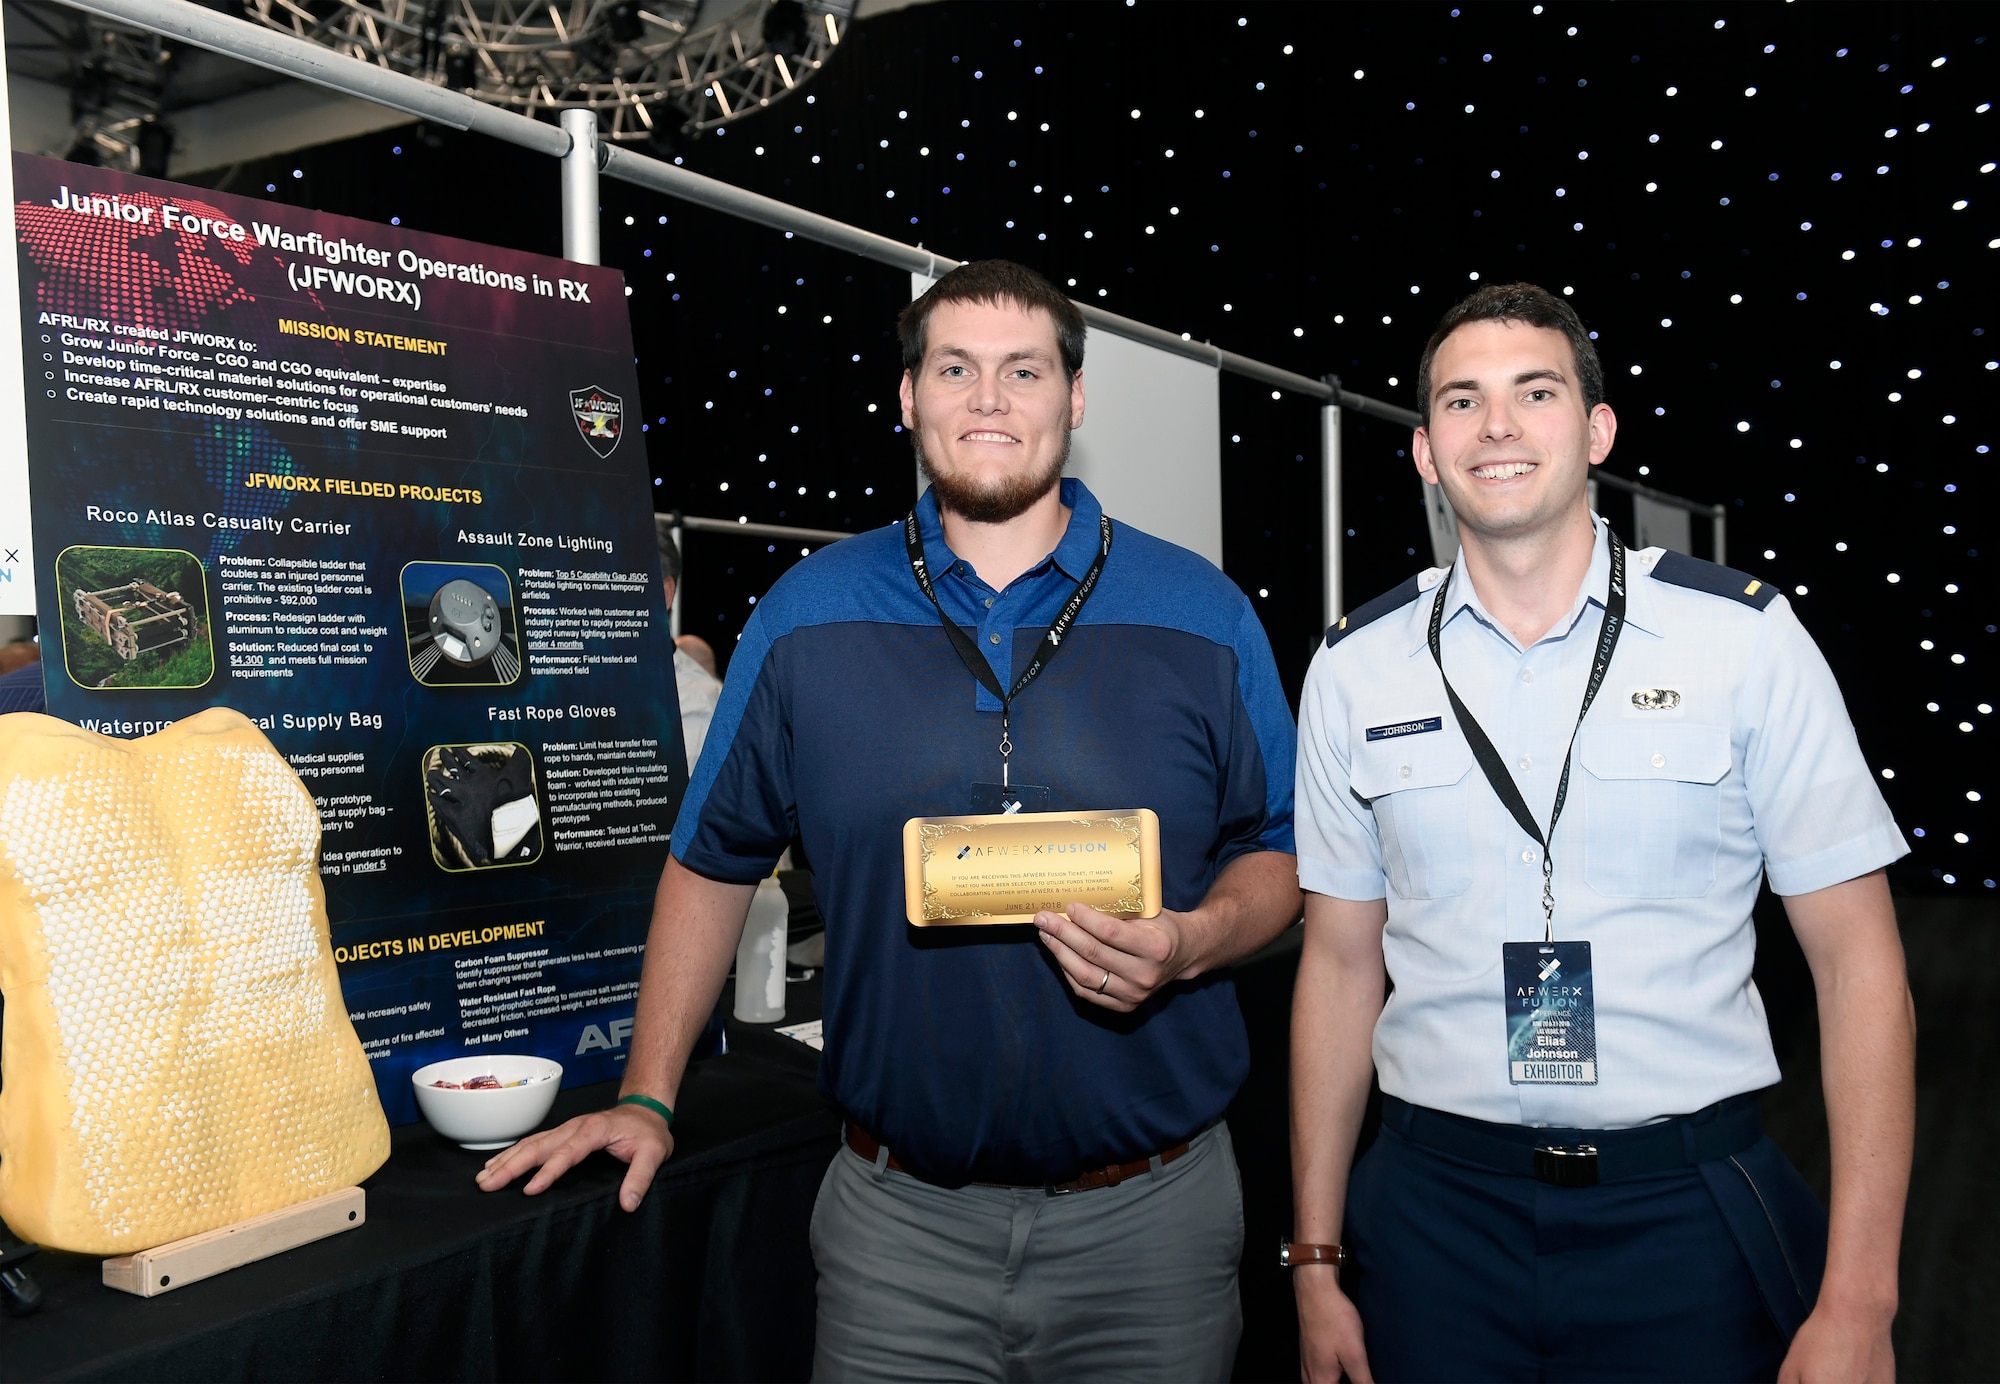 John Bales, a mechanical engineer with AFRL’s Materials and Manufacturing Directorate, and 2nd Lt. Elias Johnson, an AFRL materials research engineer, with their Fusion Ticket inviting them to attend a Fusion Ticket event during the week of July 16 at AFWERX Vegas. Initial startup funding, in the range of $150,000, is up for grabs to further assess the teams' technology at the Fusion Ticket event. They were selected for their Flexible Body Armor technology idea. (AFWERX photo/Bobby Mack)